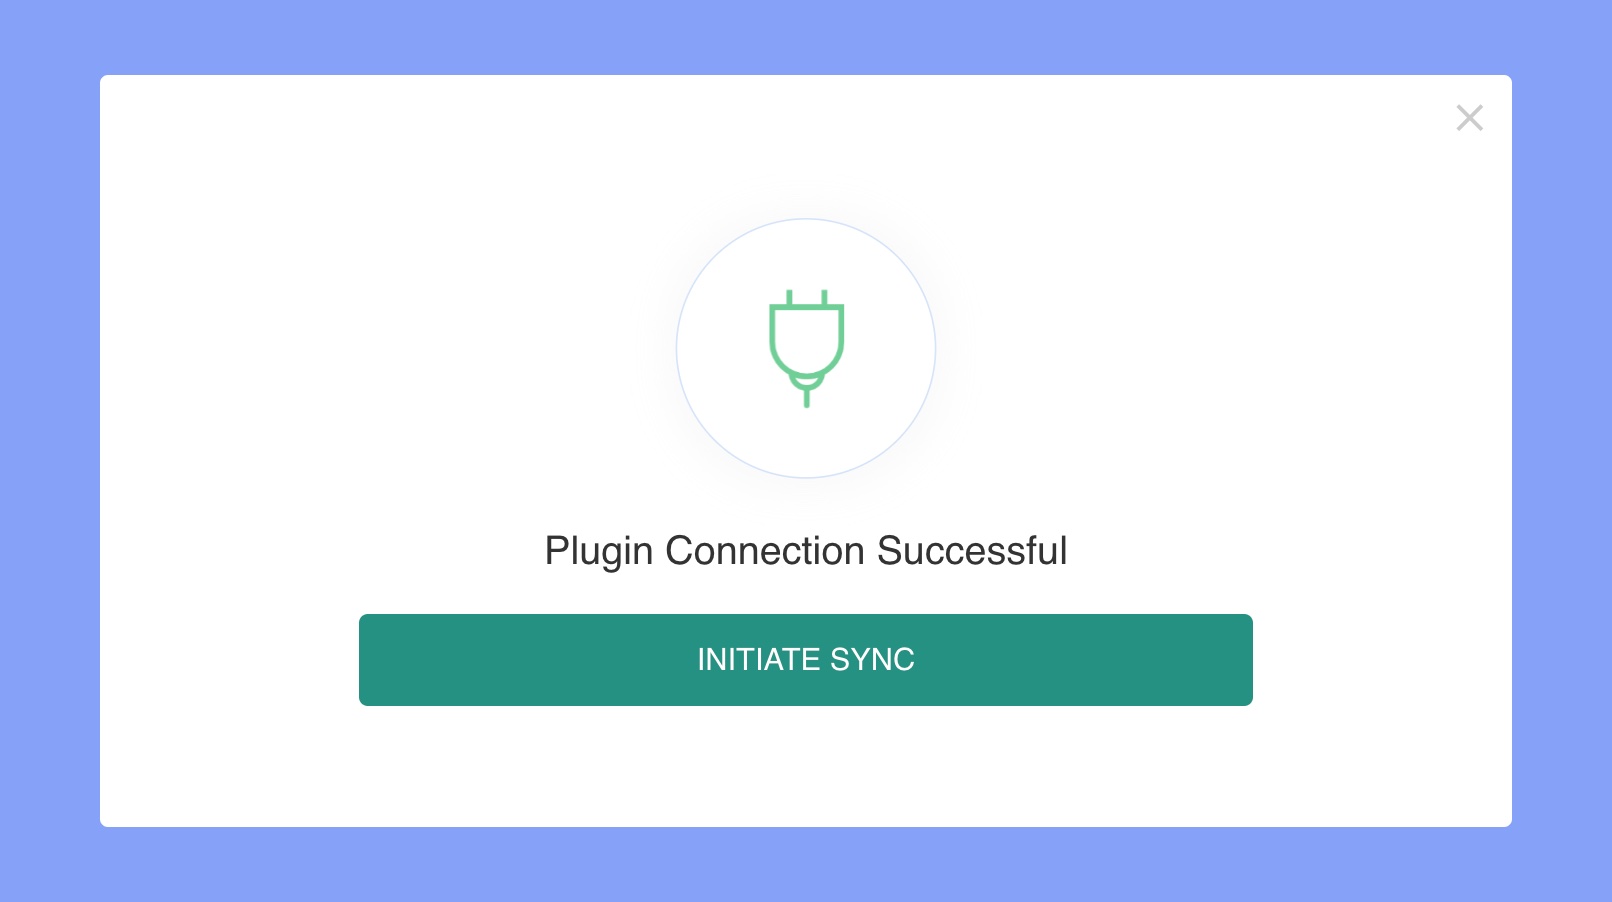 BlogVault plugin is connected successfully